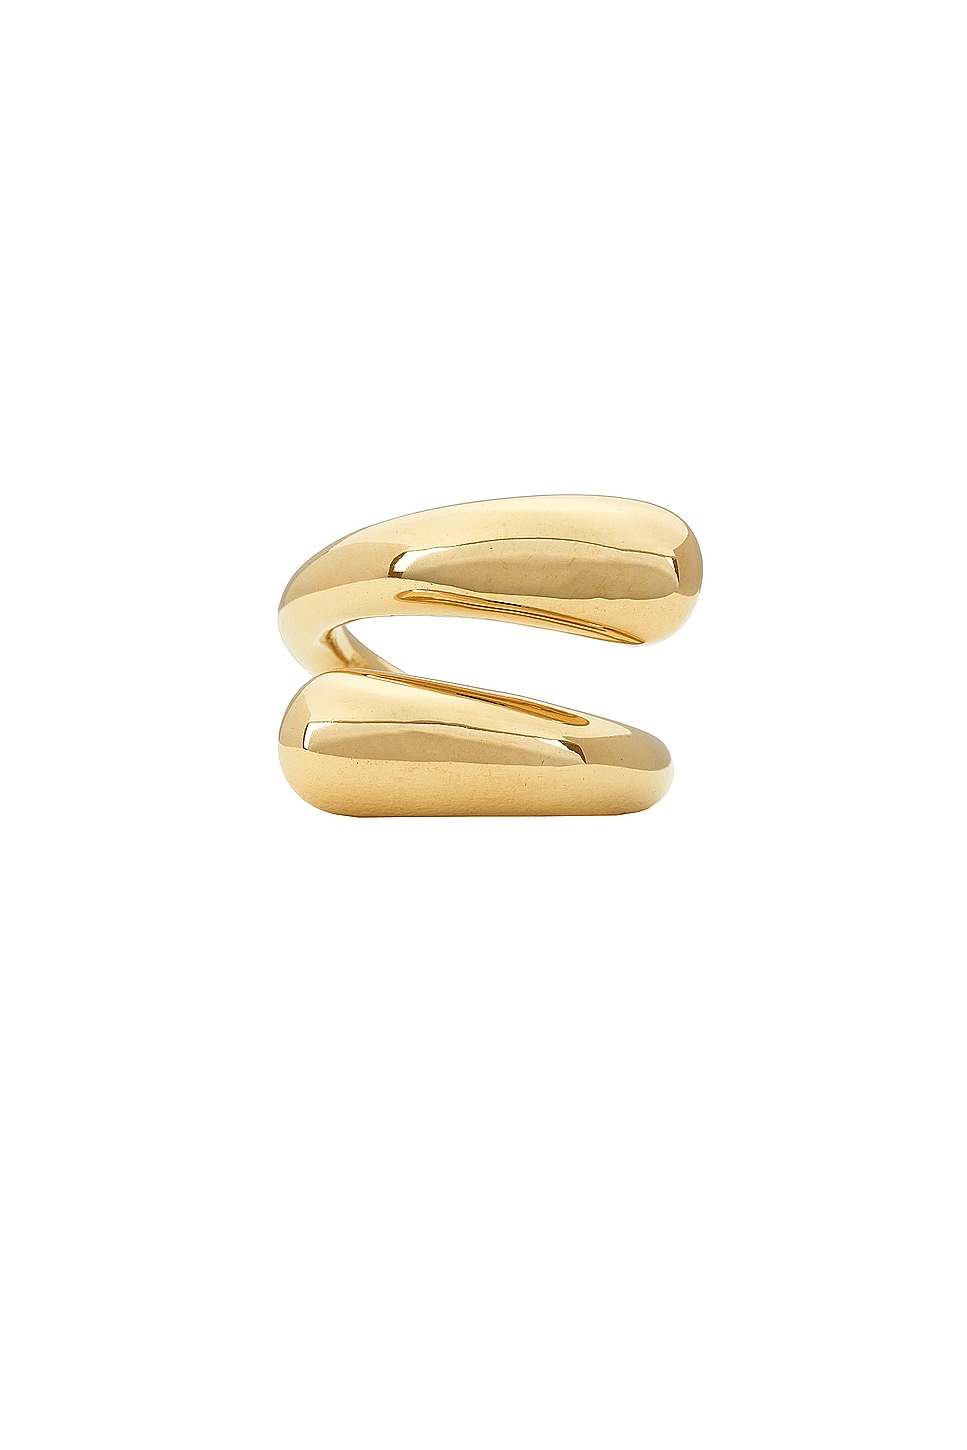 Image 1 of Lie Studio The Victoria Ring in 18k Gold Plated